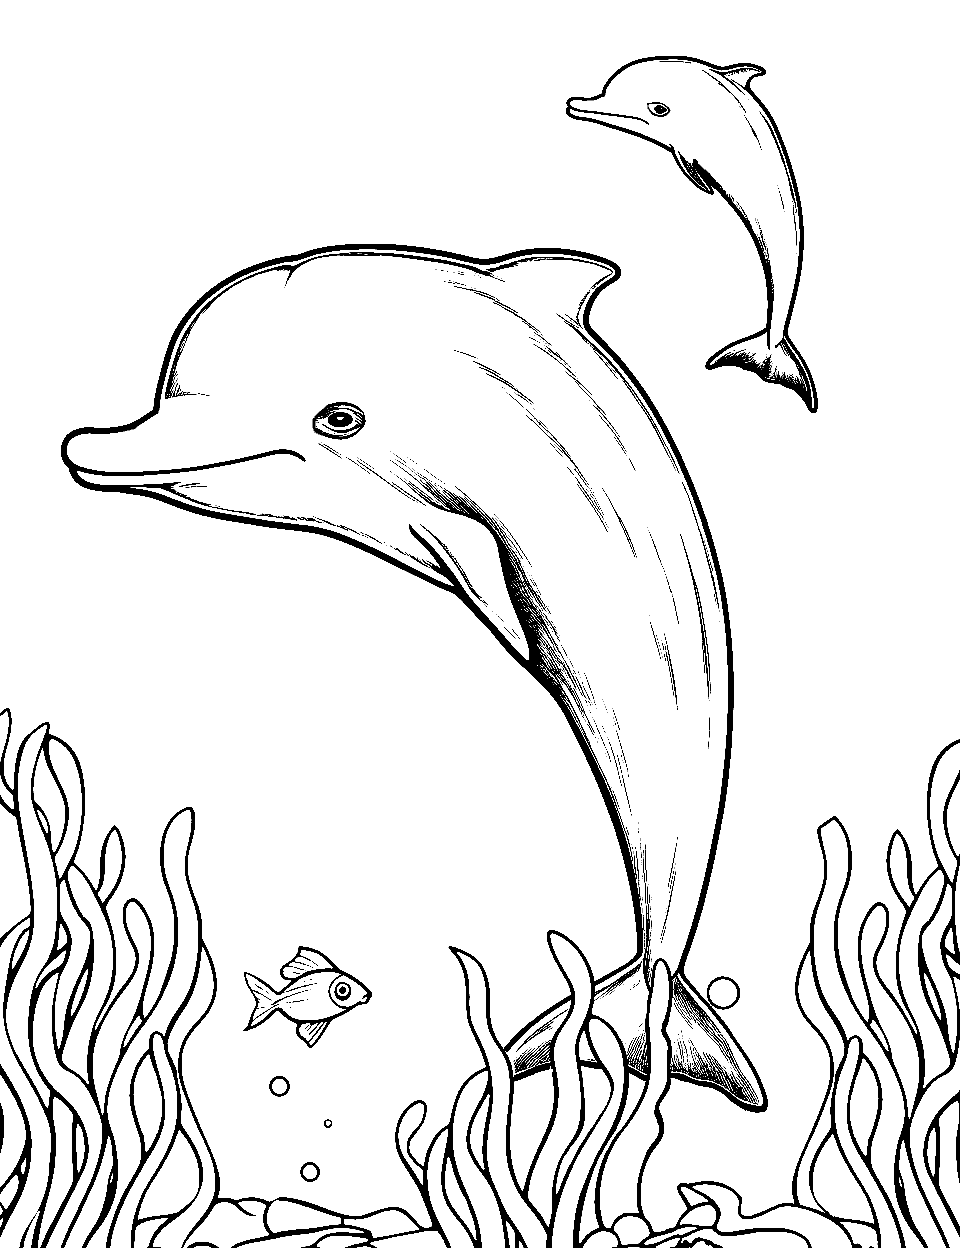 Underwater Dolphin Family Coloring Page - A mother dolphin and her baby swimming together.